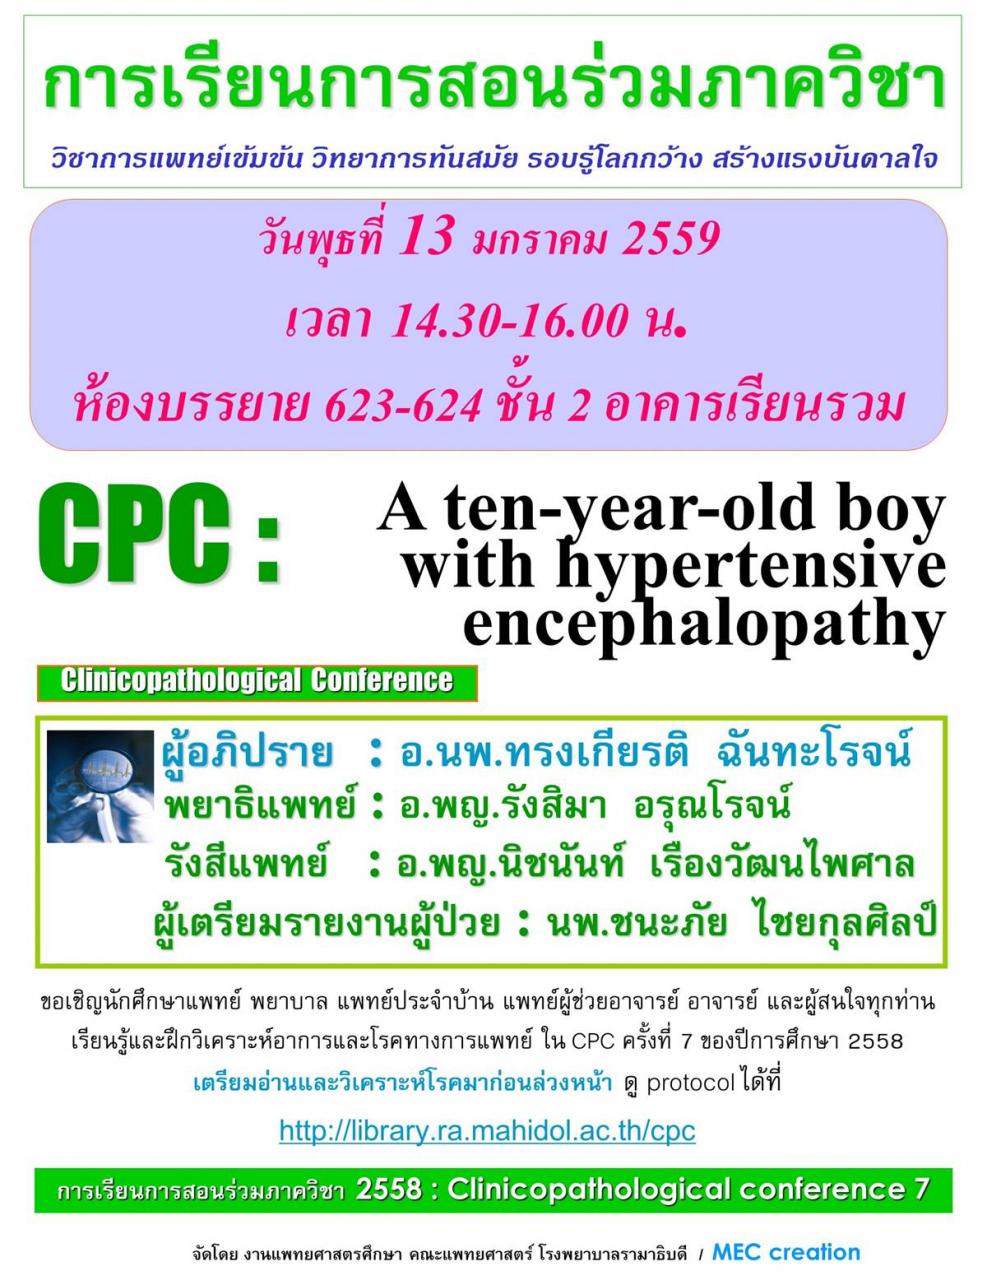 Clinicopathological Conference "A ten-year-old boy with hypertensive encephalopathy"